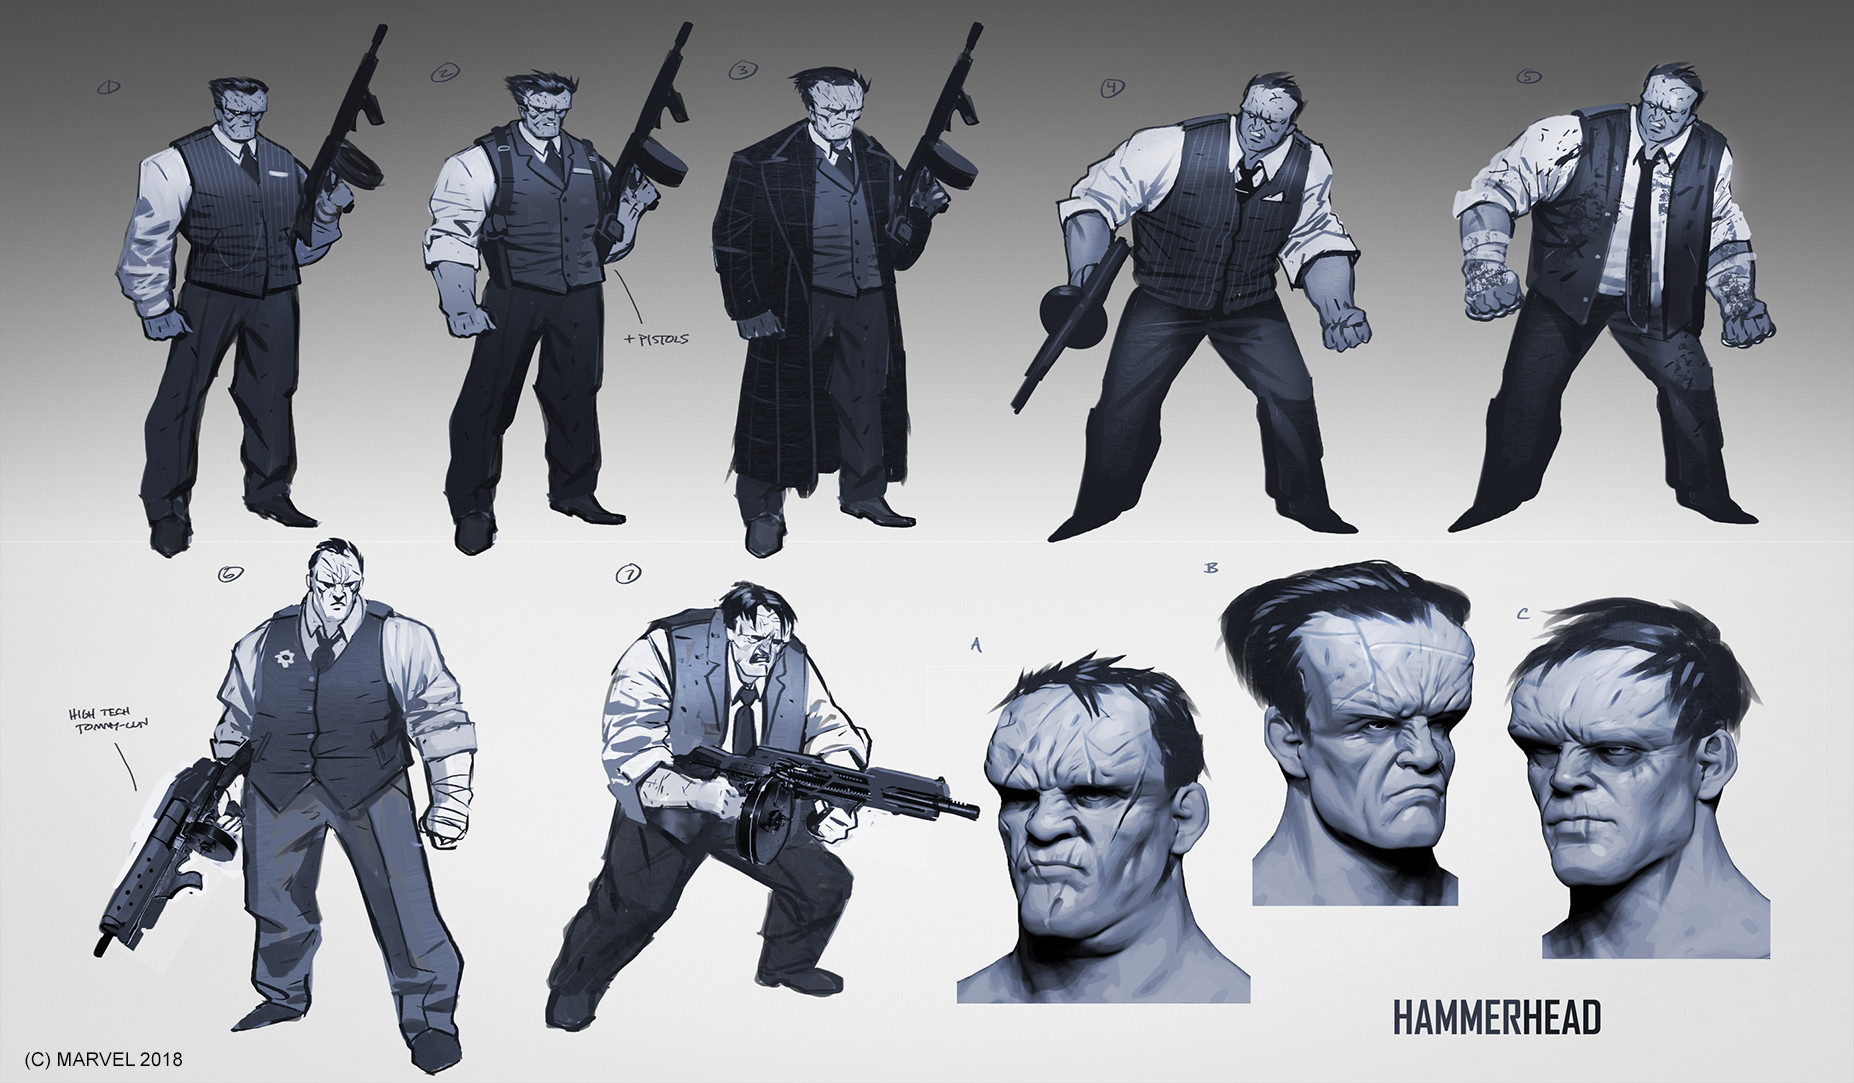 Daryl Mandryk on Twitter: "Hammerhead concepts - Spiderman PS4 #SpiderMan #Marvel #cocneptart #characterdesign https://t.co/xtIMsCK3SW" / Twitter